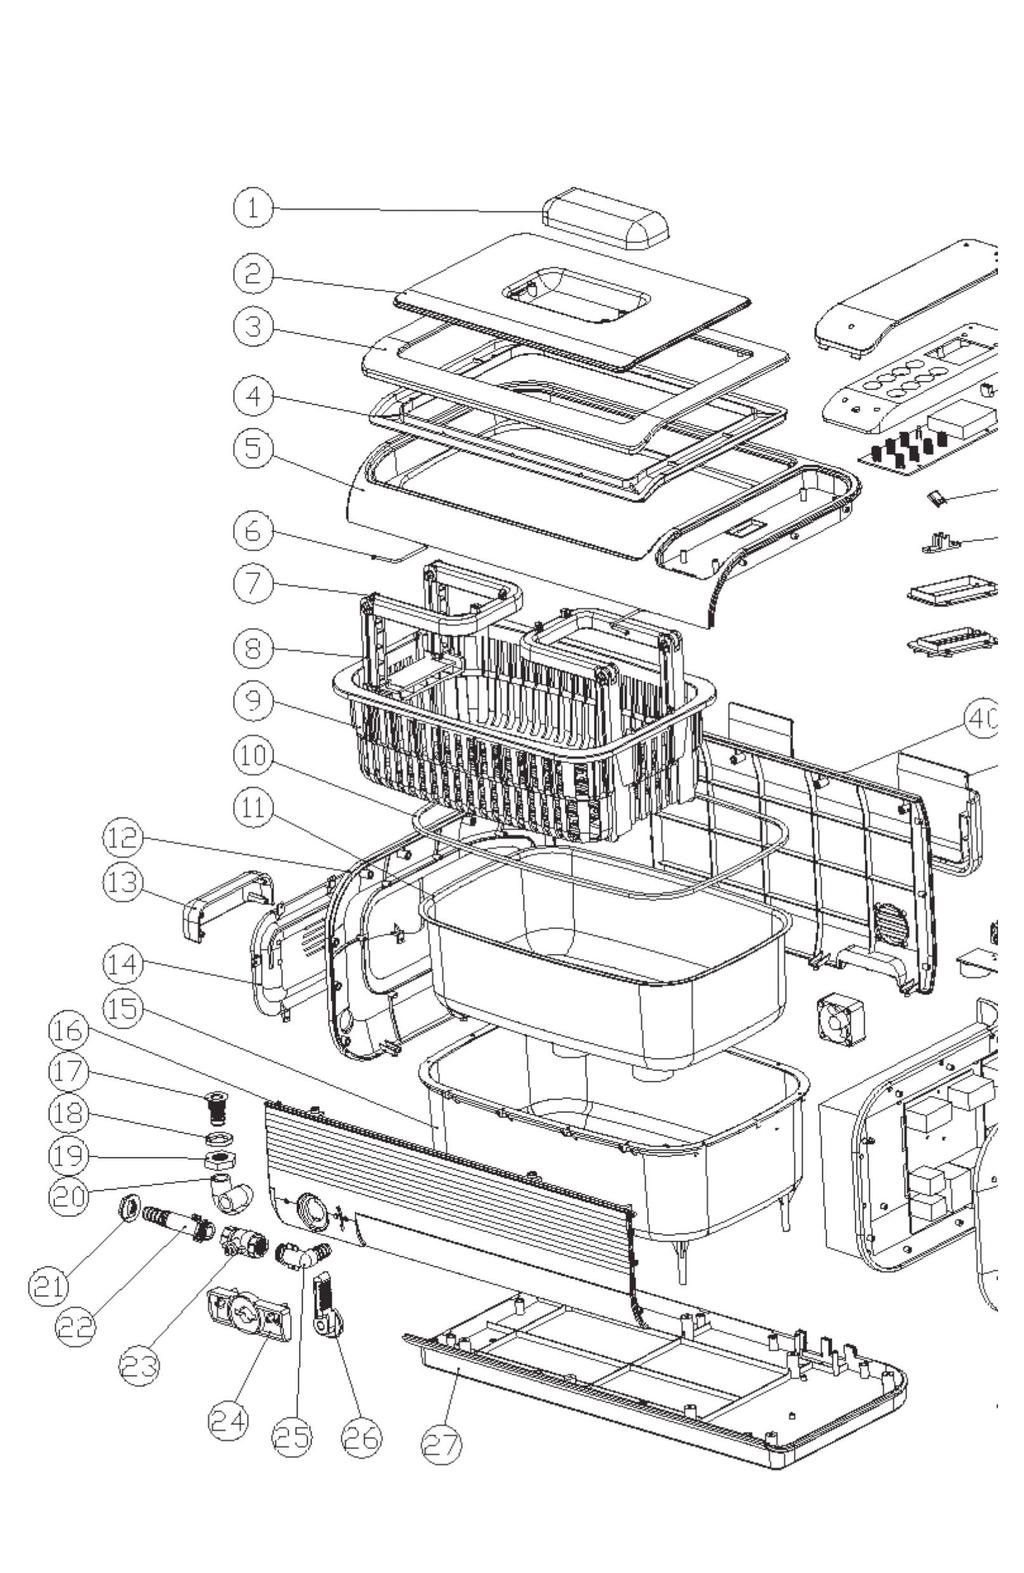 PRODUCT EXPLODED VIEW 14 SD-485 US